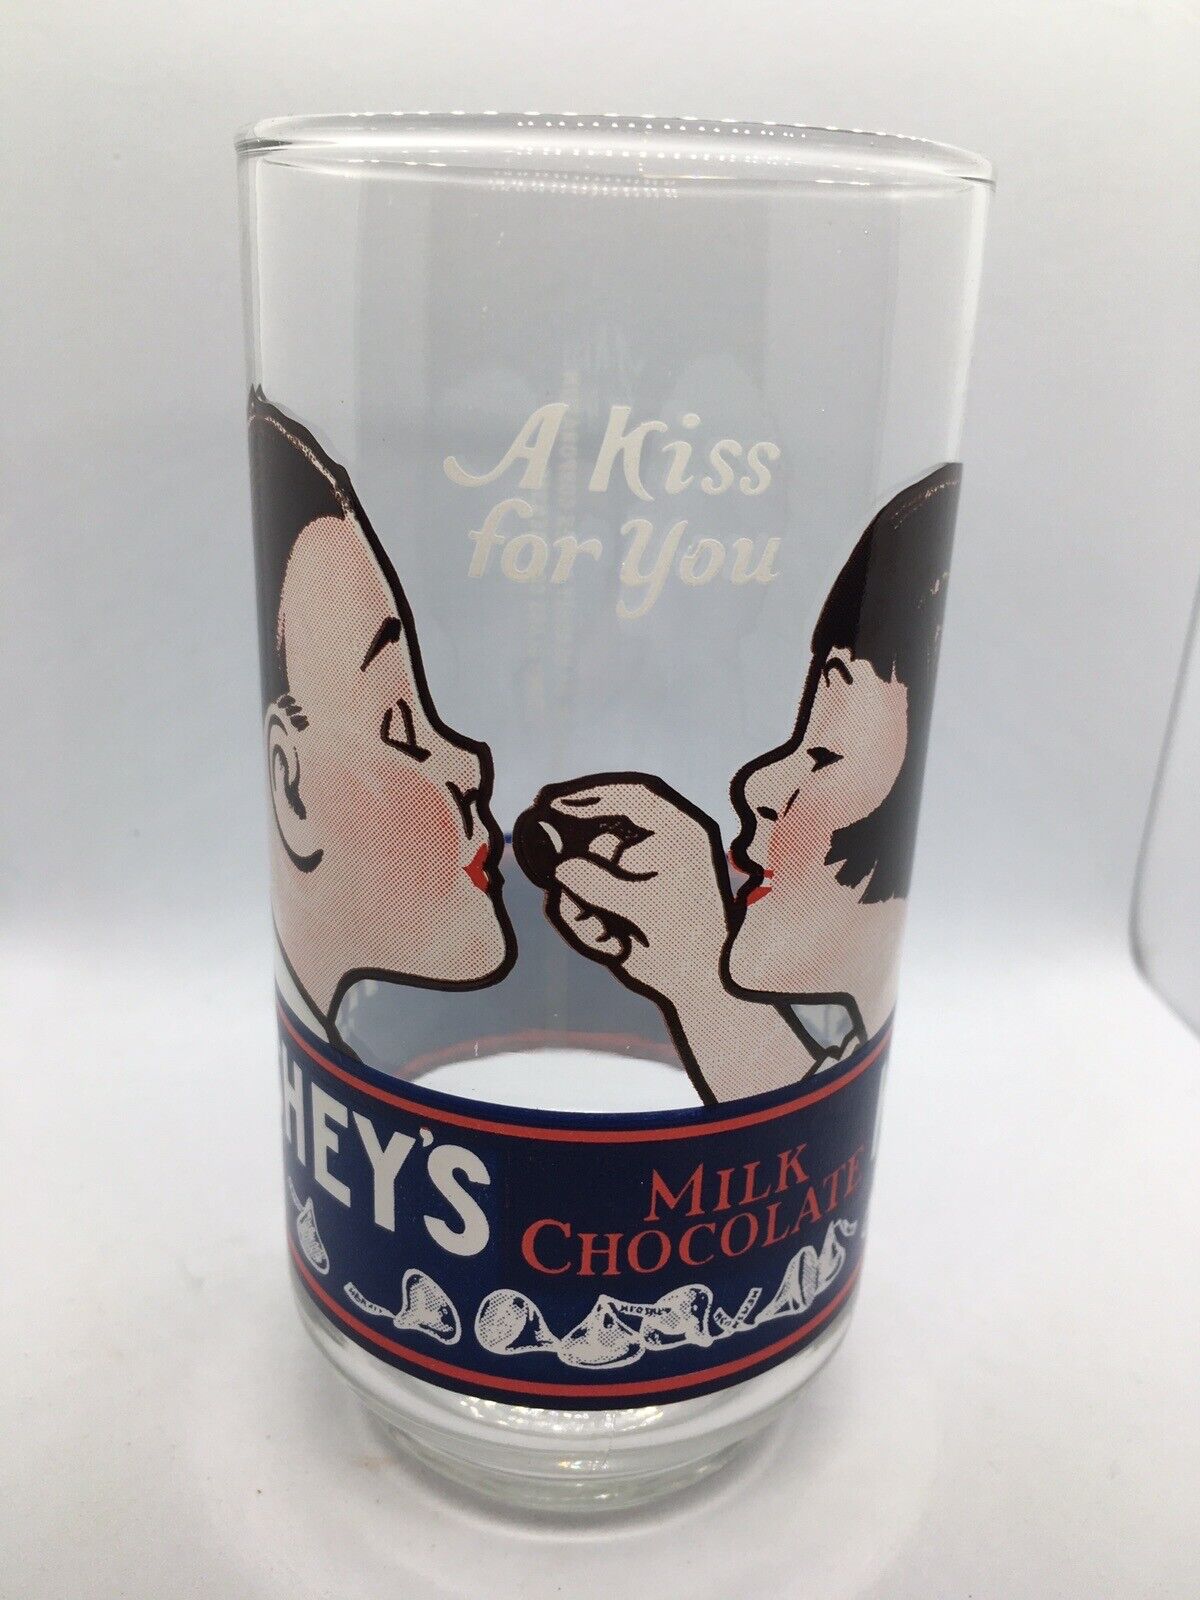 Vintage Hersey Chocolate Glass “A Kiss For You”